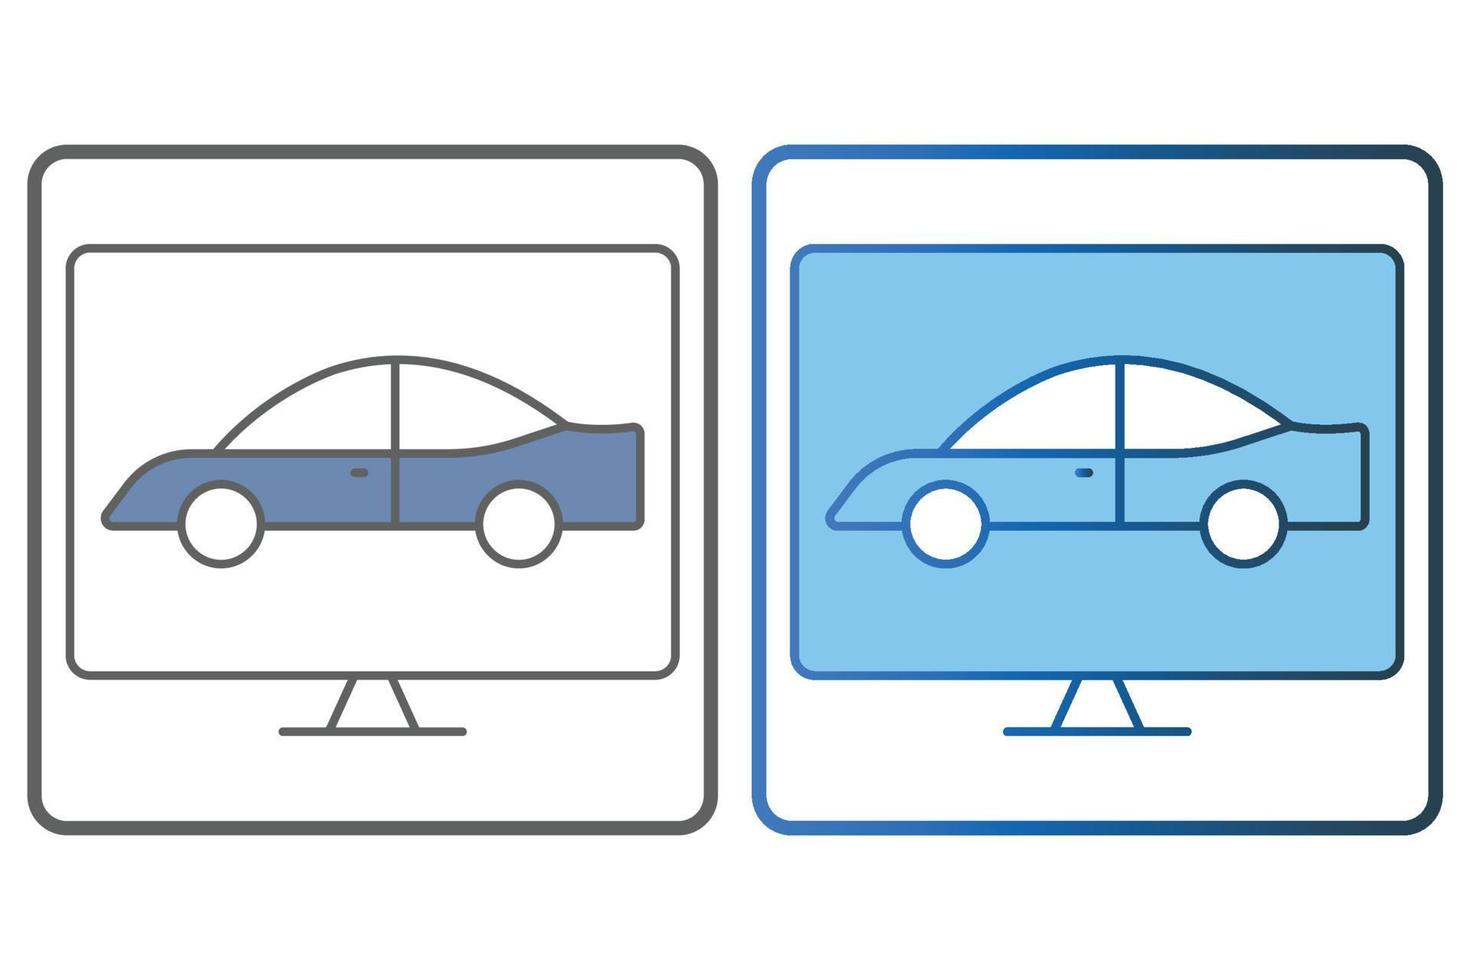 Car diagnosis icon illustration. car icon with laptop. icon related to car service, car repair. Two tone icon style, lineal color. Simple vector design editable